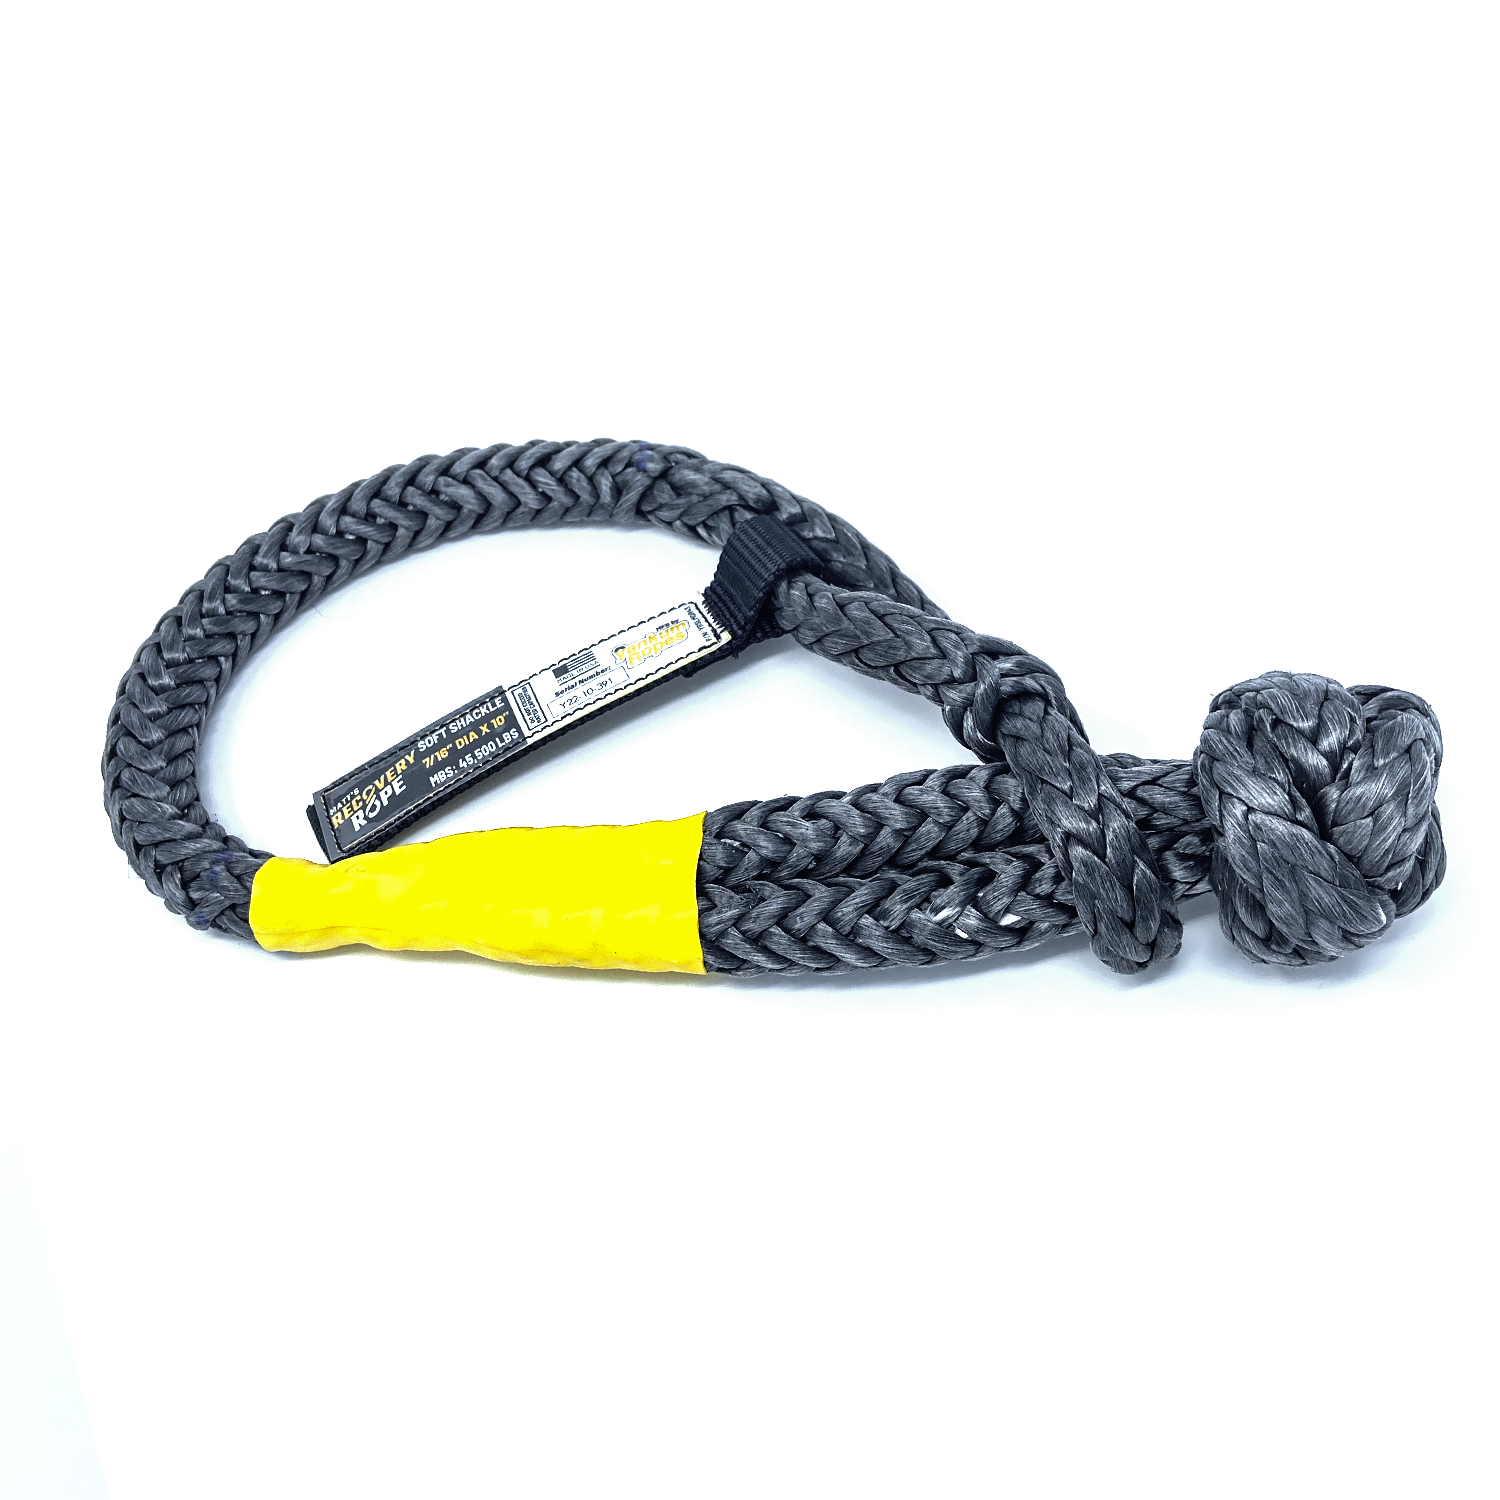 3/16 dia. Extreme Soft Shackle, Yellow (MTS 13,500 Lbs) - ASR Offroad